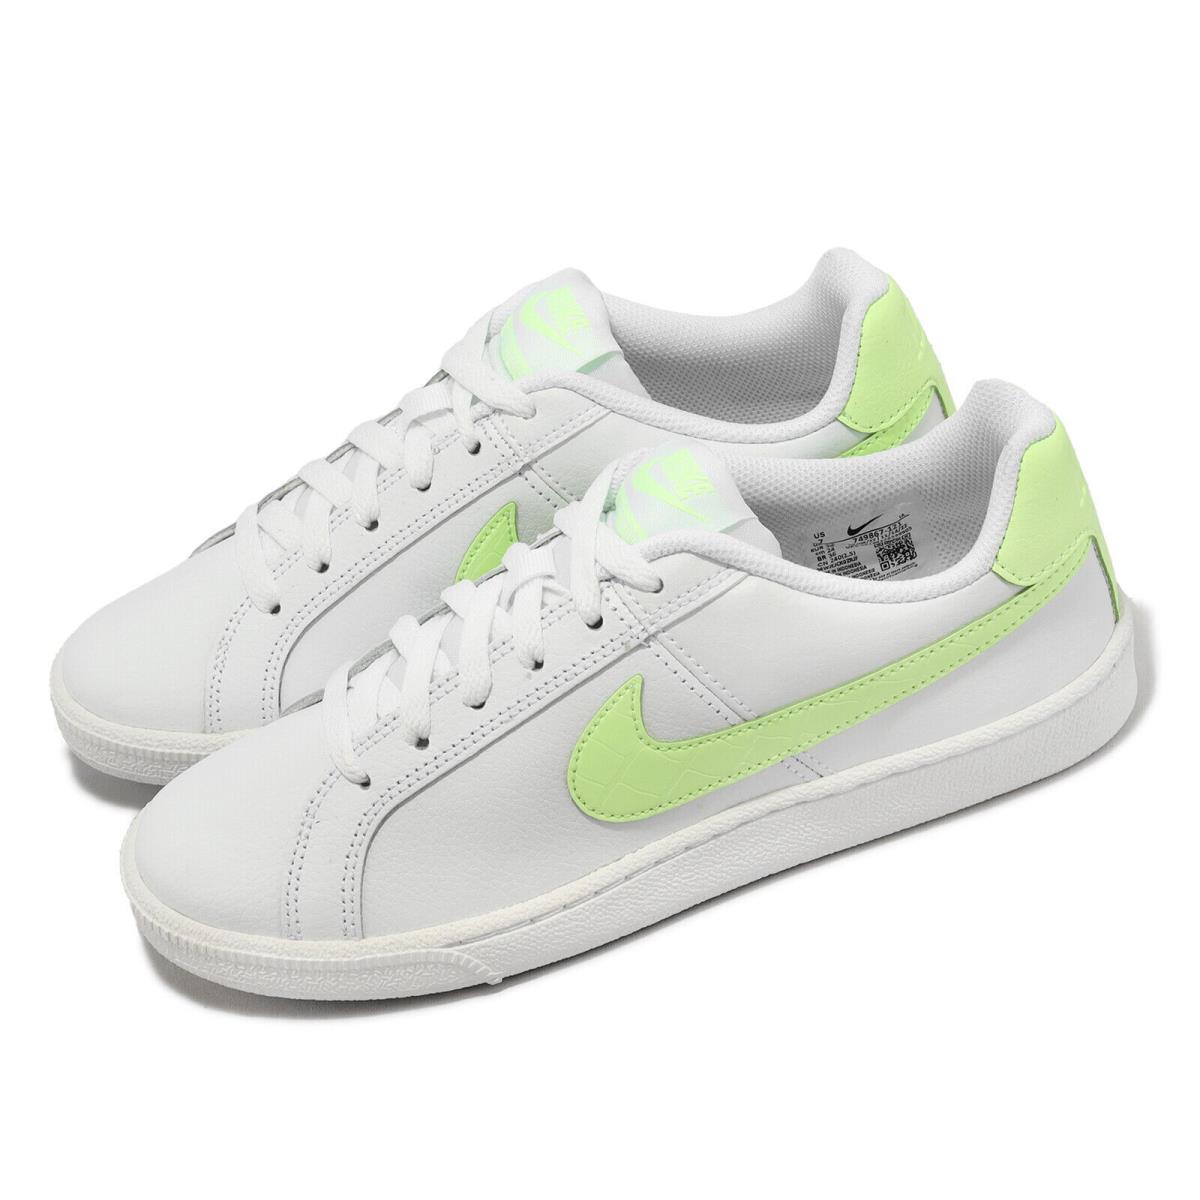 Women Nike Court Royale Low Casual Shoes Sneakers White/barely Volt 749867-121 - White/Barely Volt